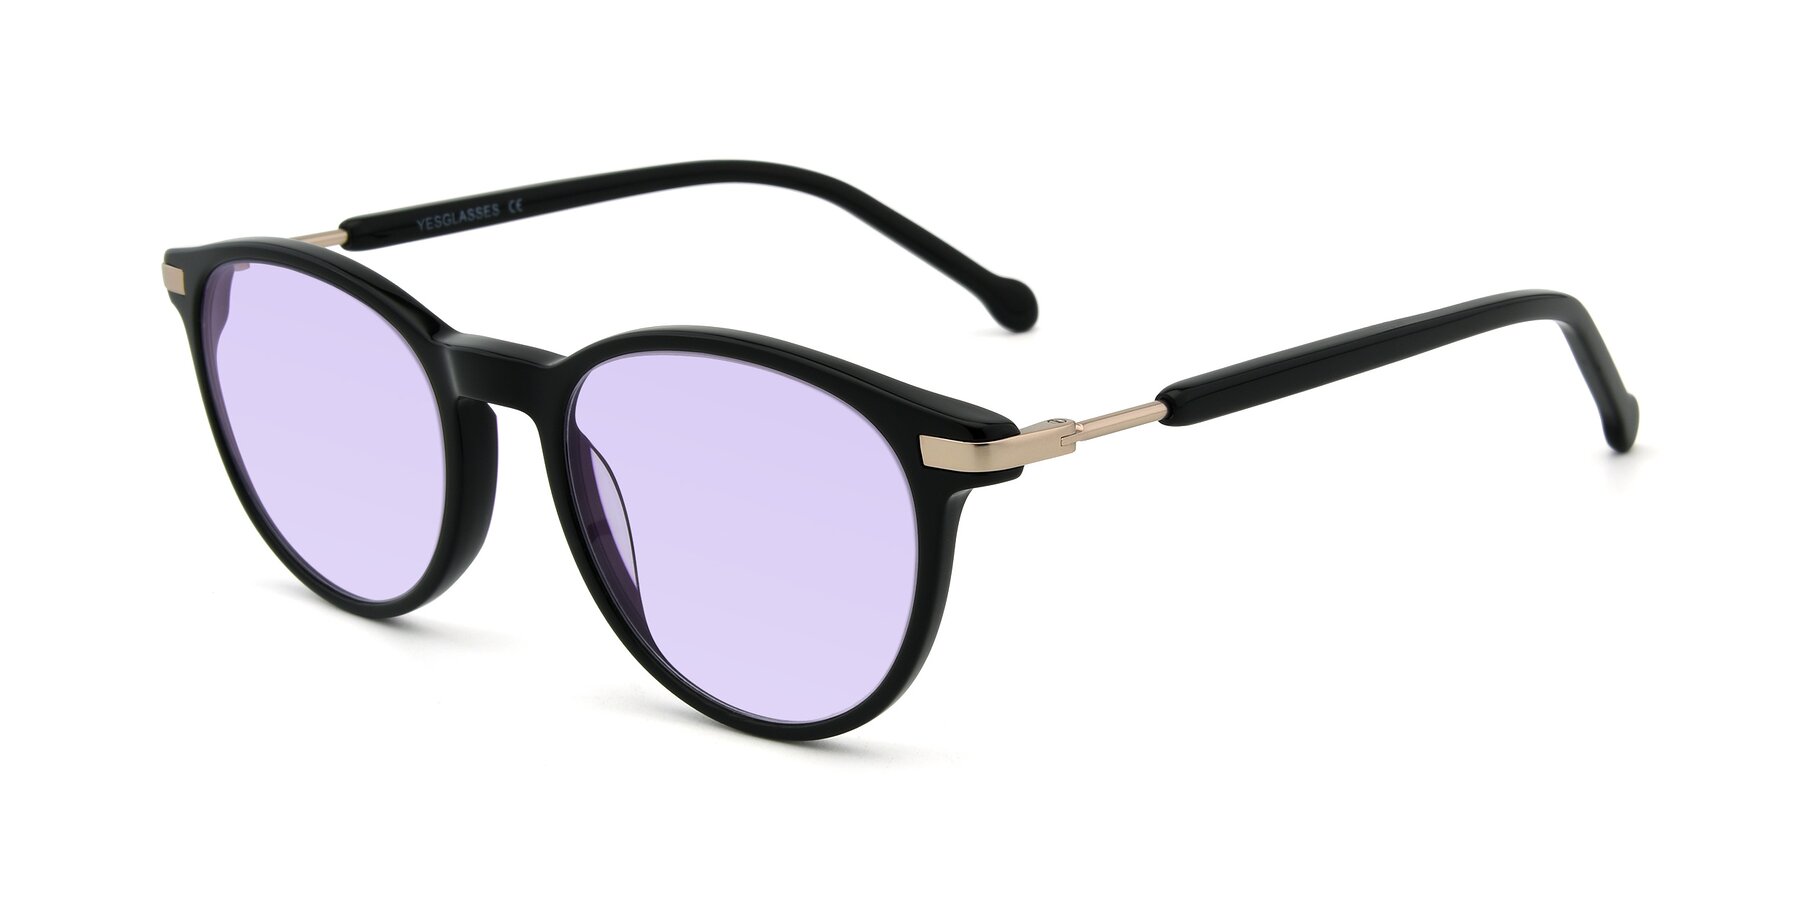 Angle of 17429 in Black with Light Purple Tinted Lenses